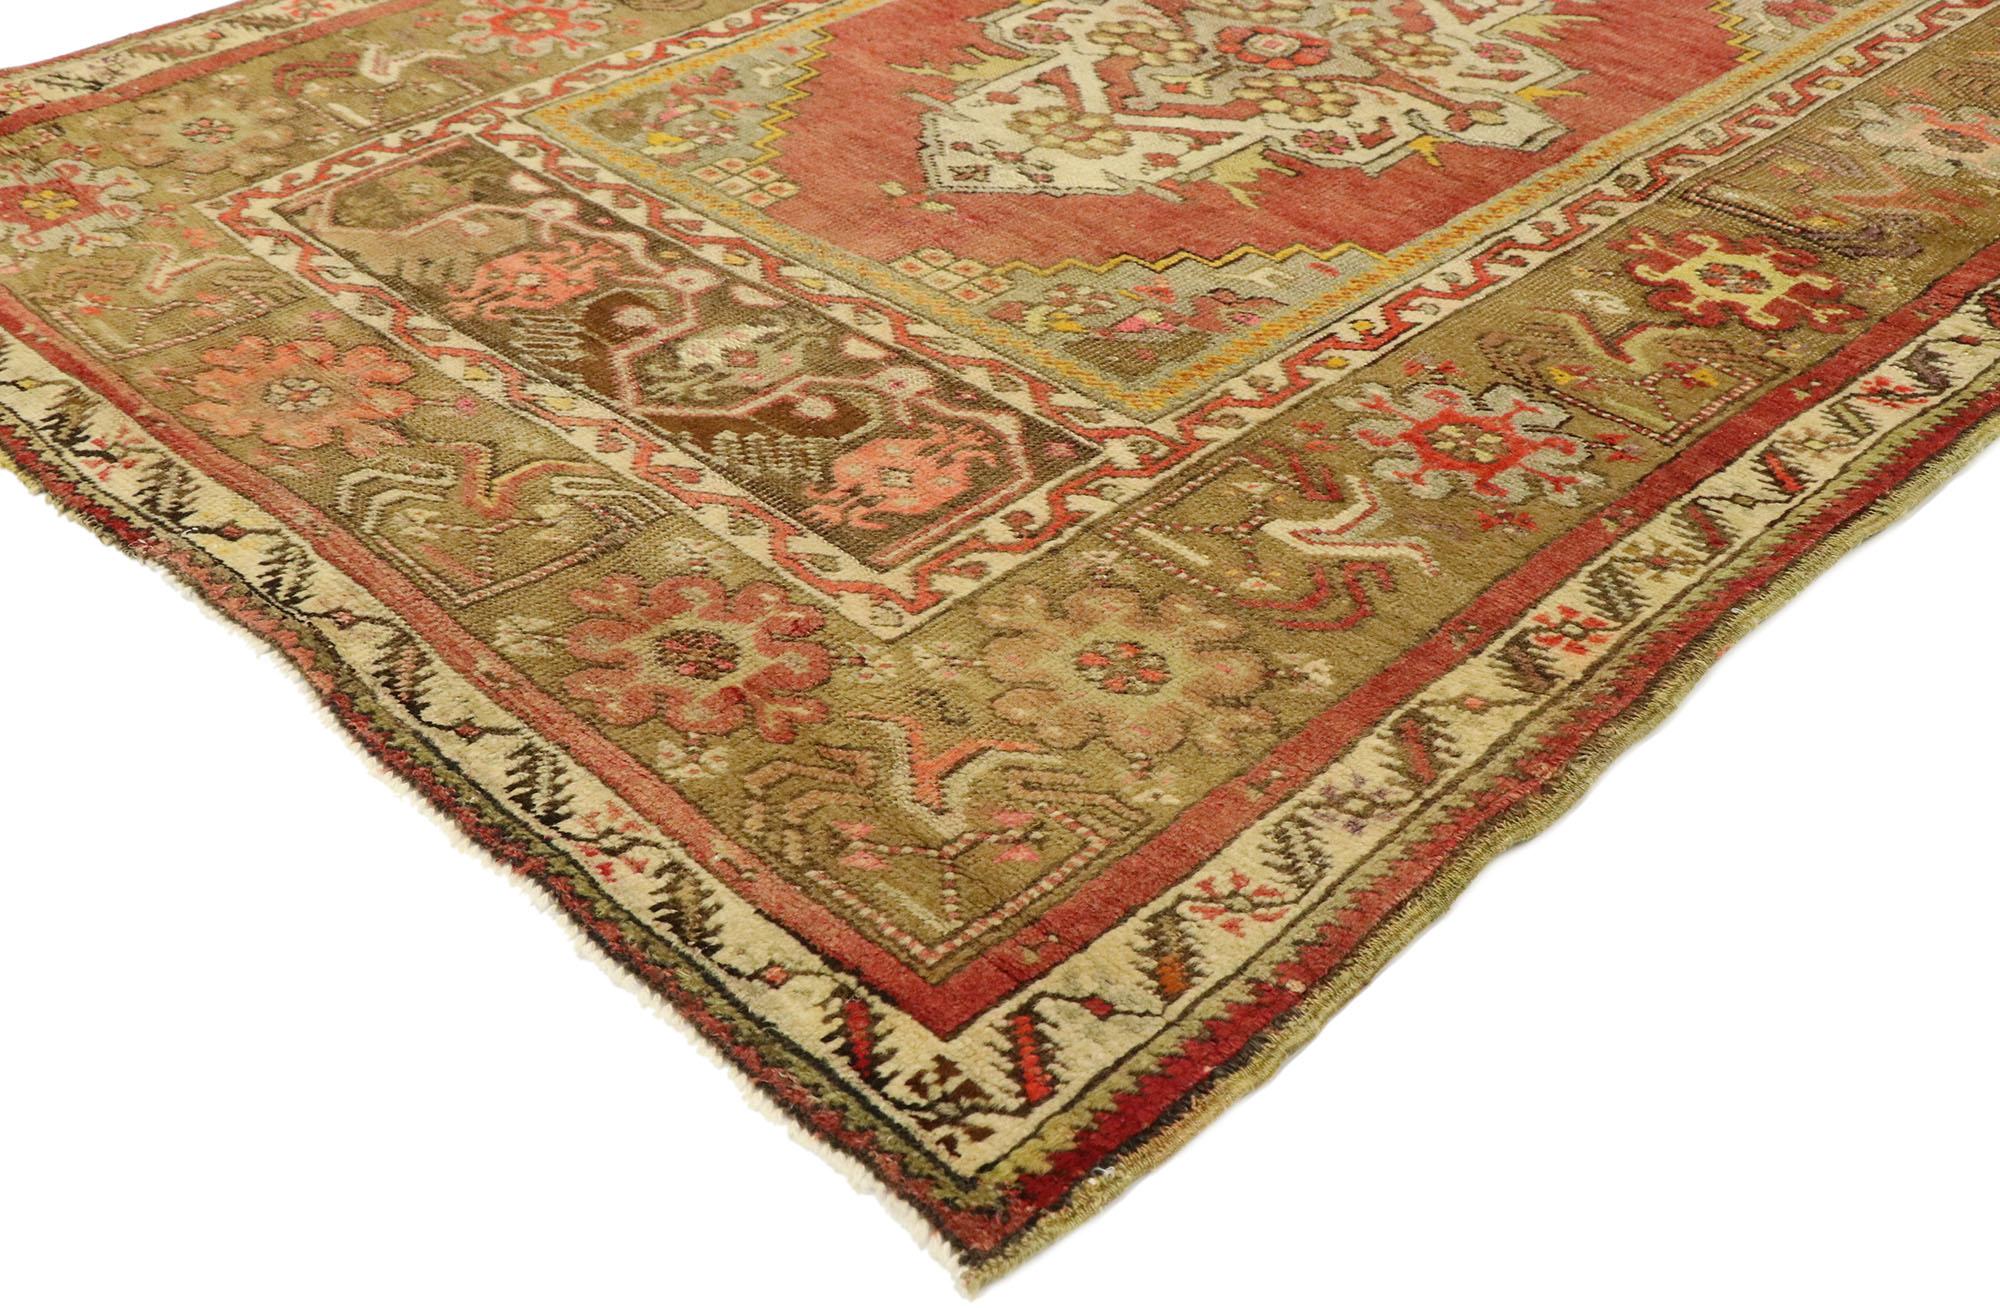 51178 Vintage Turkish Oushak Rug, 03'06 x 05'00. 
This hand-knotted wool vintage Turkish Oushak rug features a cross-like centre medallion in an abrashed scarlet red field. Gray spandrels filled with rosettes, animals and symbolic Anatolian motifs